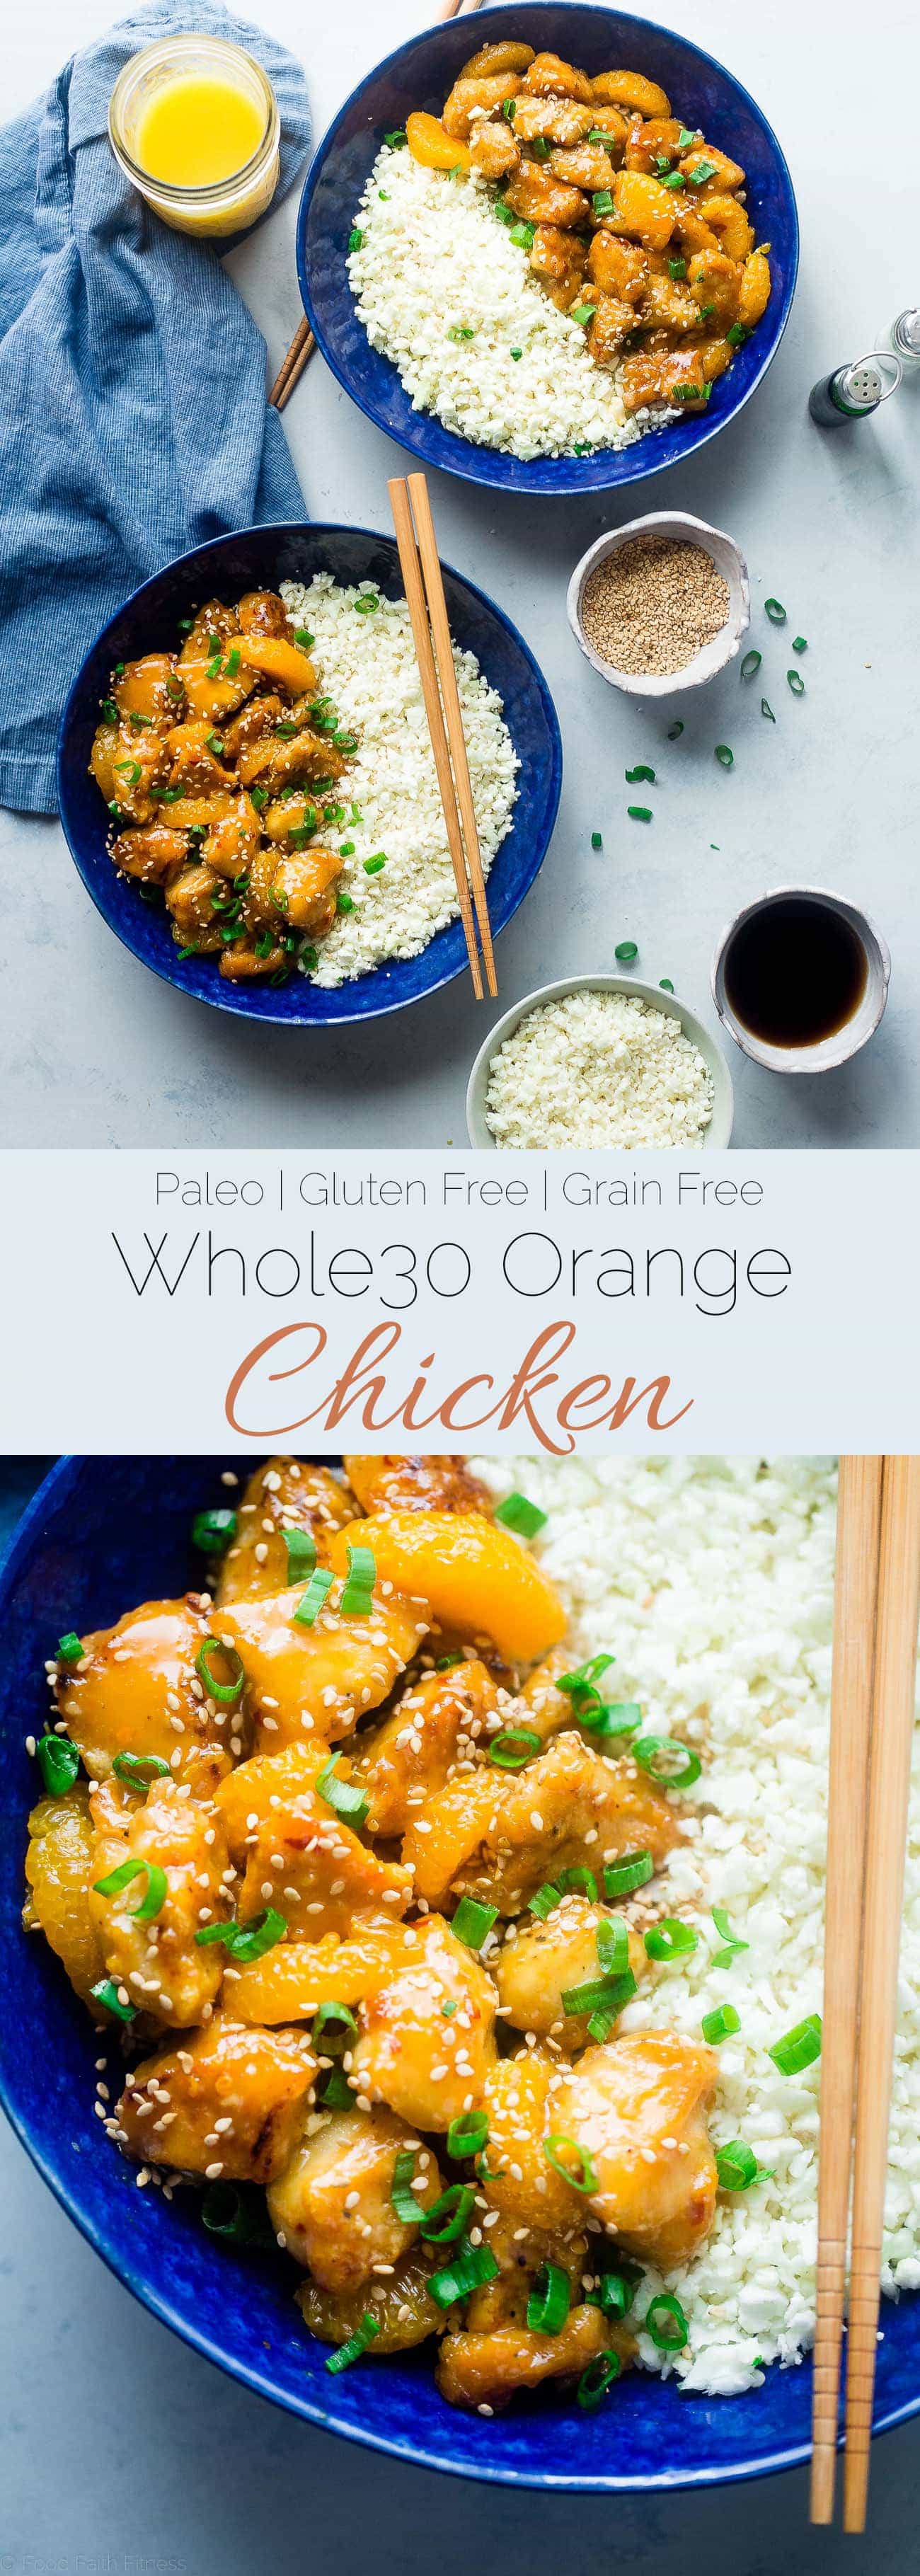 Whole30 Orange Chicken - This 30 minute, paleo orange chicken is so much better and healthier than takeout! It's a quick and easy, whole30 compliant dinner that the whole family will love! | Foodfaithfitness.com | @FoodFaithFit